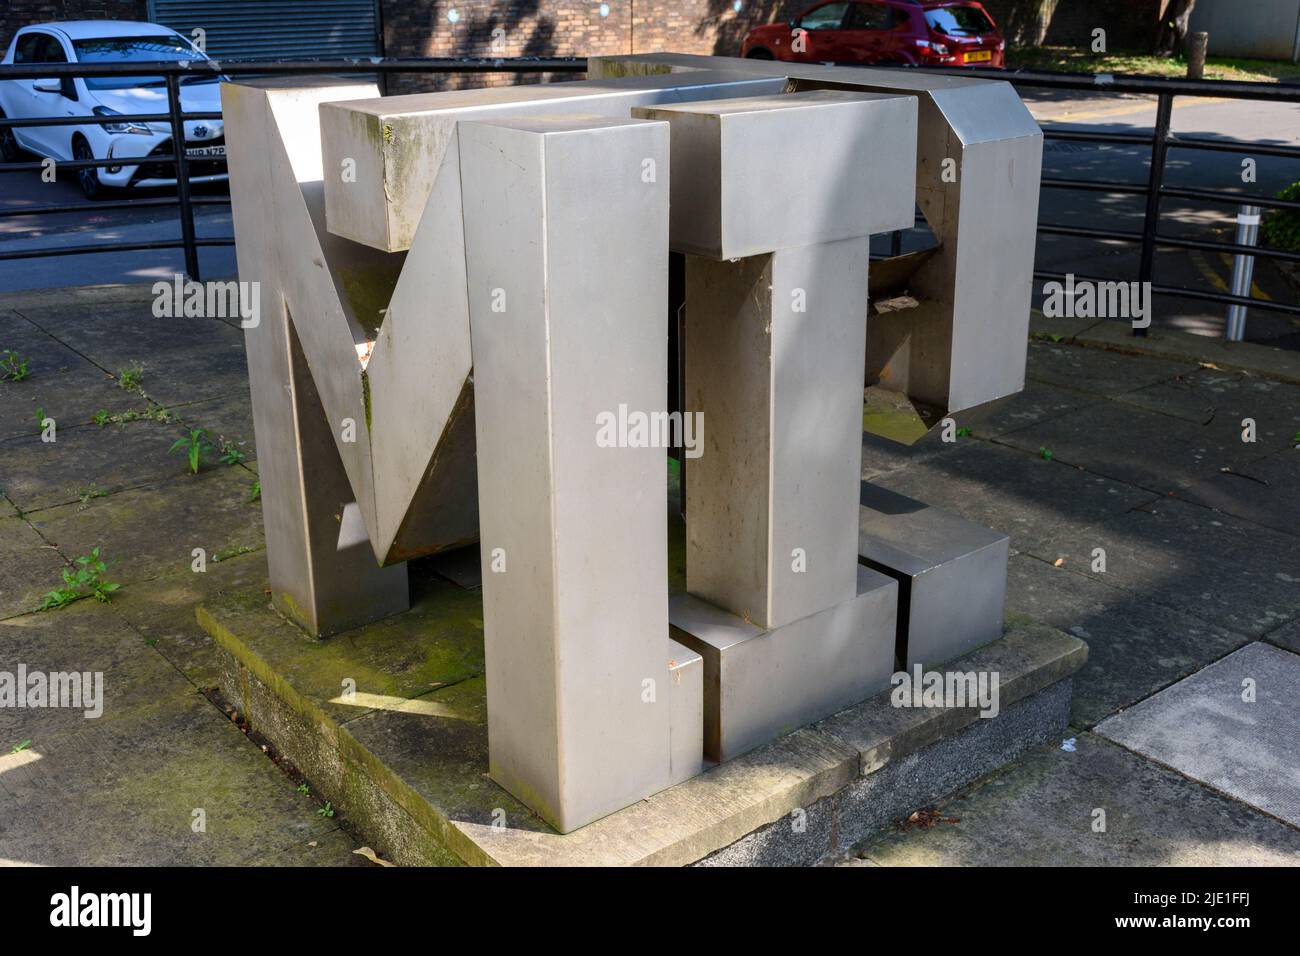 UMIST Cube, a sculpture by Christopher Rose-Innes and Stockport Sheet Metal.  UMIST campus, University of Manchester, Manchester, England, UK Stock Photo